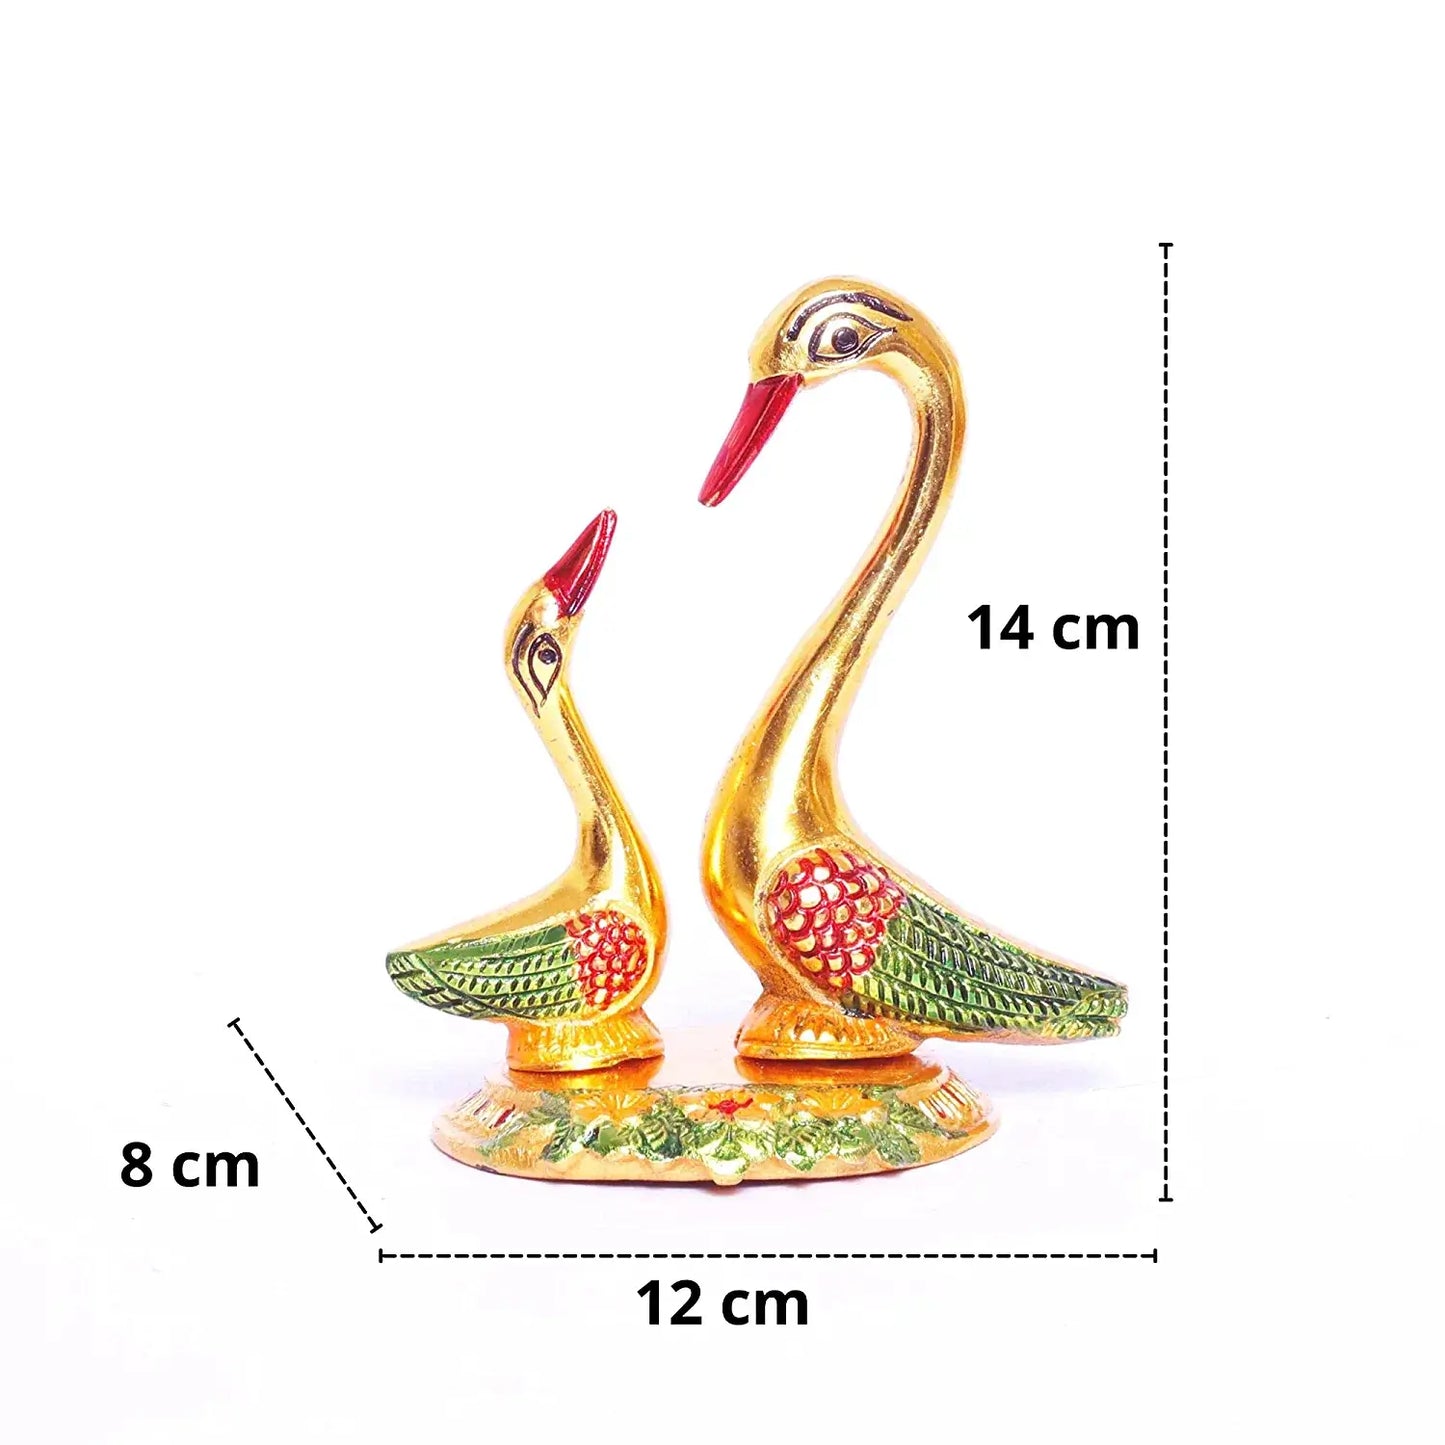 Multicolour Love Birds swan Set Pair of Kissing Duck Metal Statue,Romantic Gift for Girl Friend,Decoration Idol for Showcase,Table,Animal